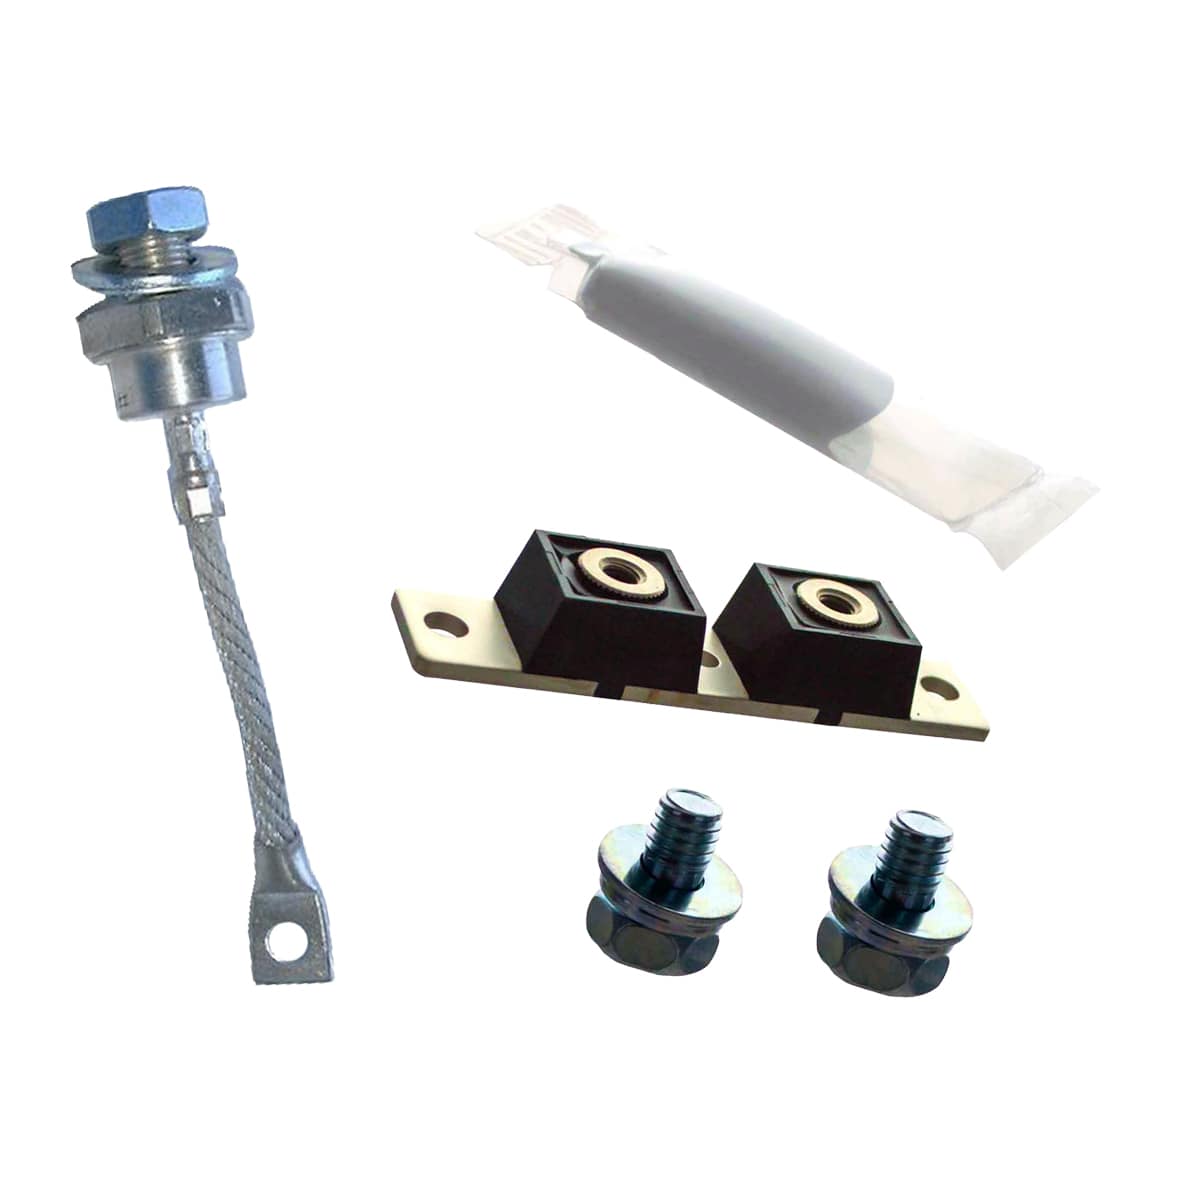 KIT DIODE ULTRA-FAST RECOVERY. Part: 223422